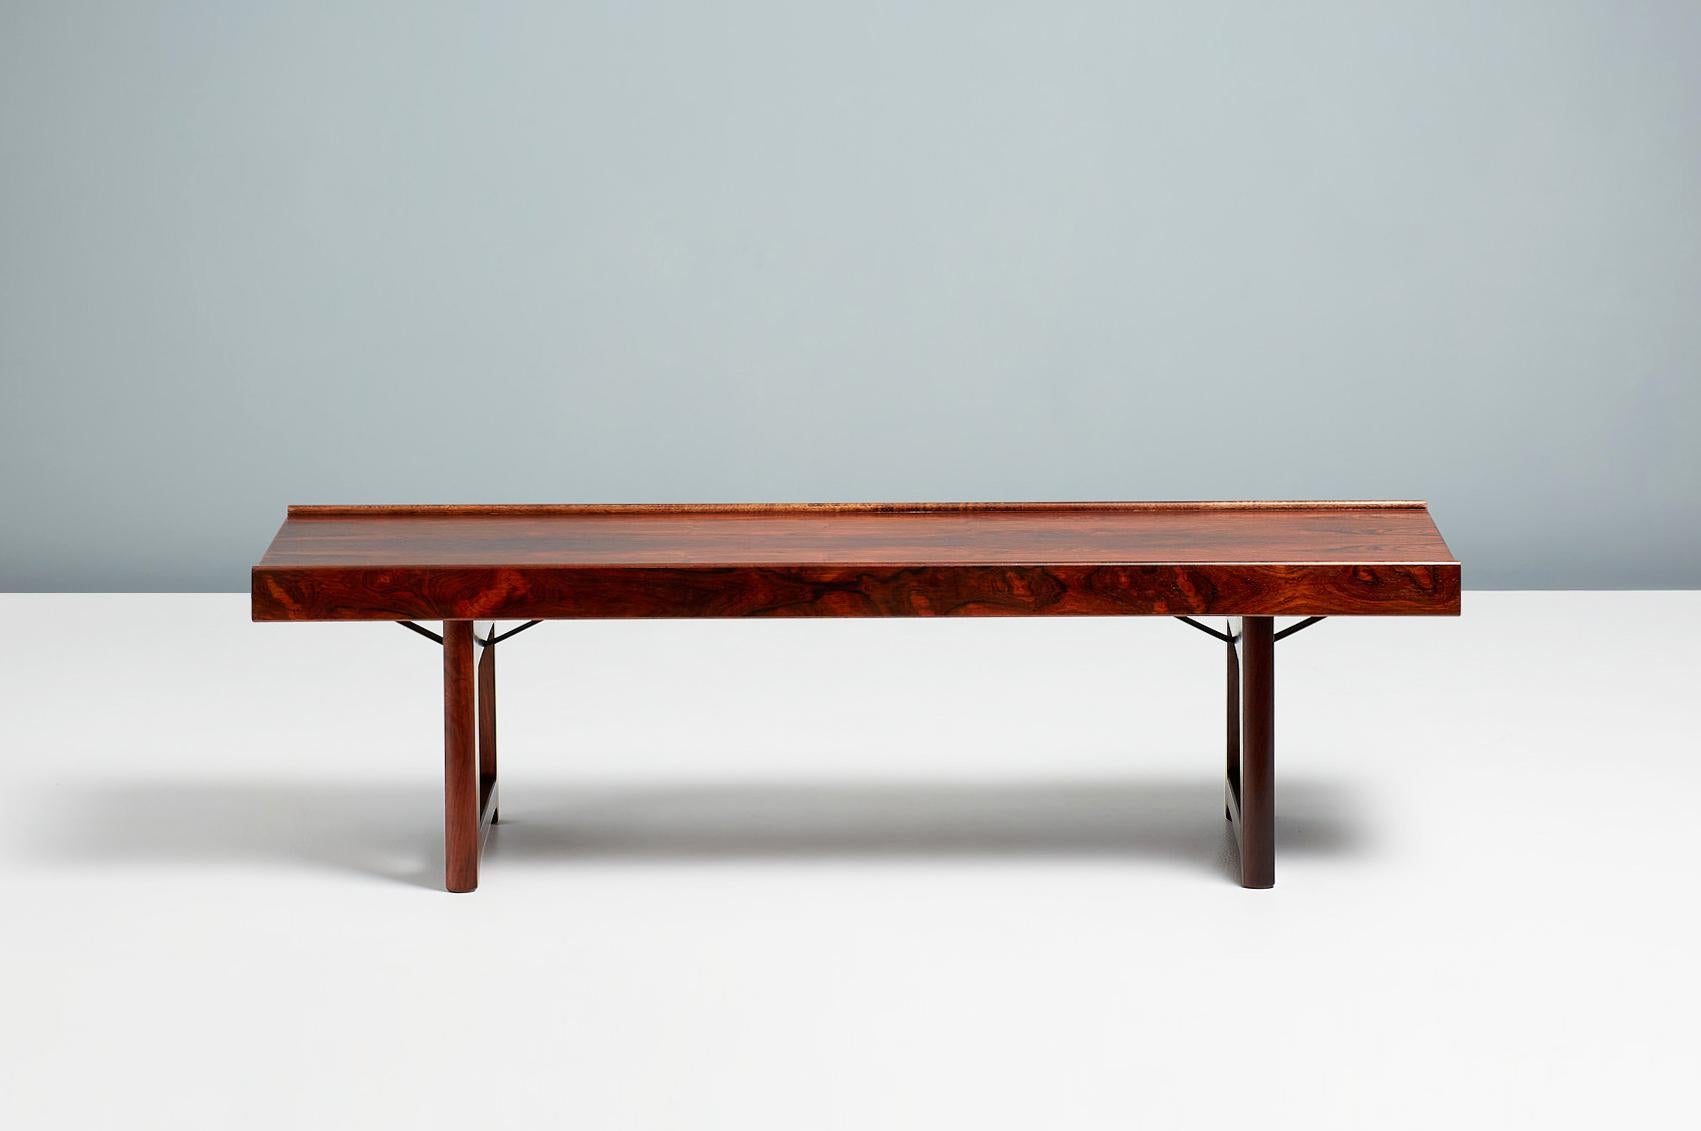 Torbjørn Afdal

Iconic midcentury design from Norway. Torbjorn Afdal's Krobo bench, circa 1960 was designed as a multipurpose bench for producer Bruksbo and can also be used as a low coffee table. This example comes in exquisite rosewood and has